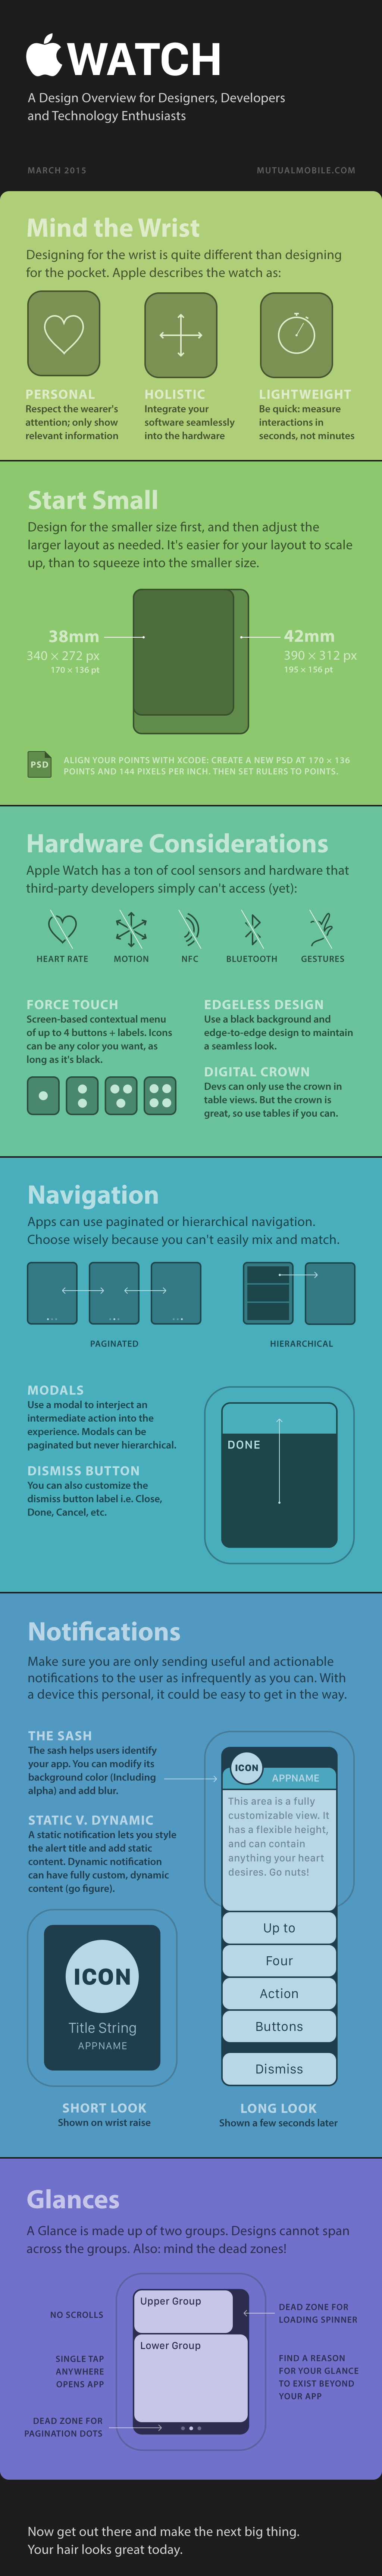 Apple Watch Design Overview [Infographic]